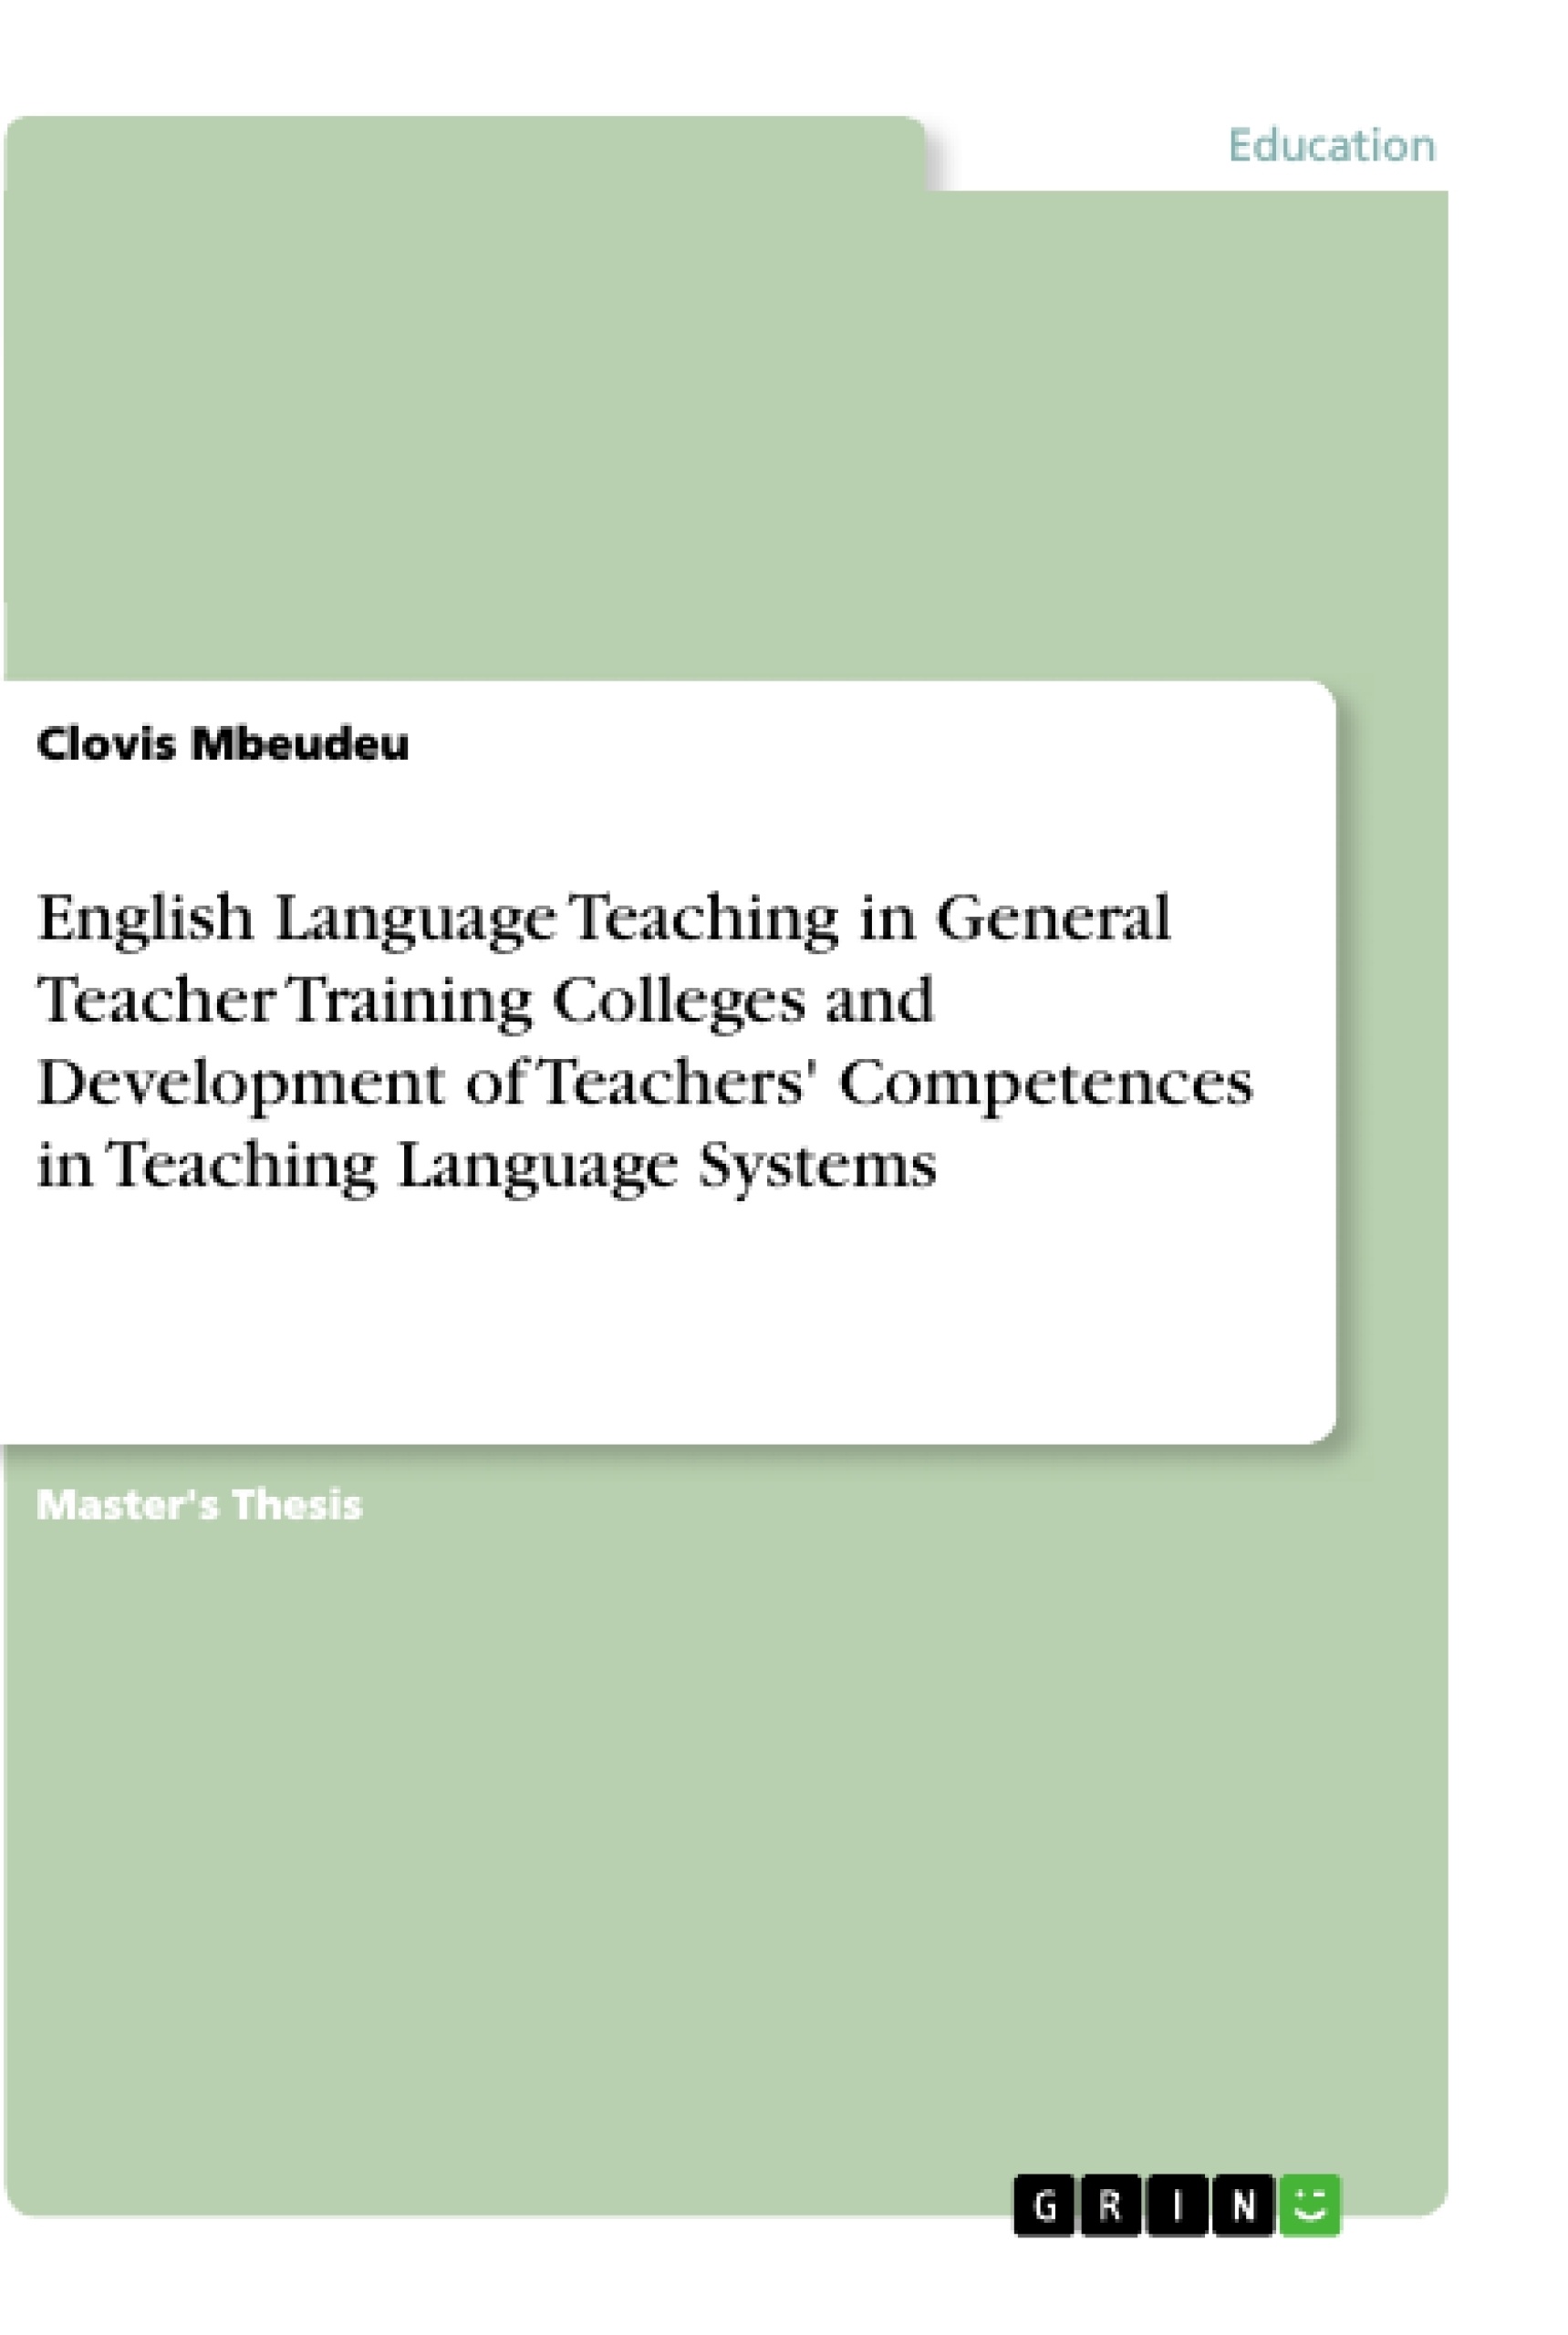 Title: English Language Teaching in General Teacher Training Colleges and Development of Teachers' Competences in Teaching Language Systems